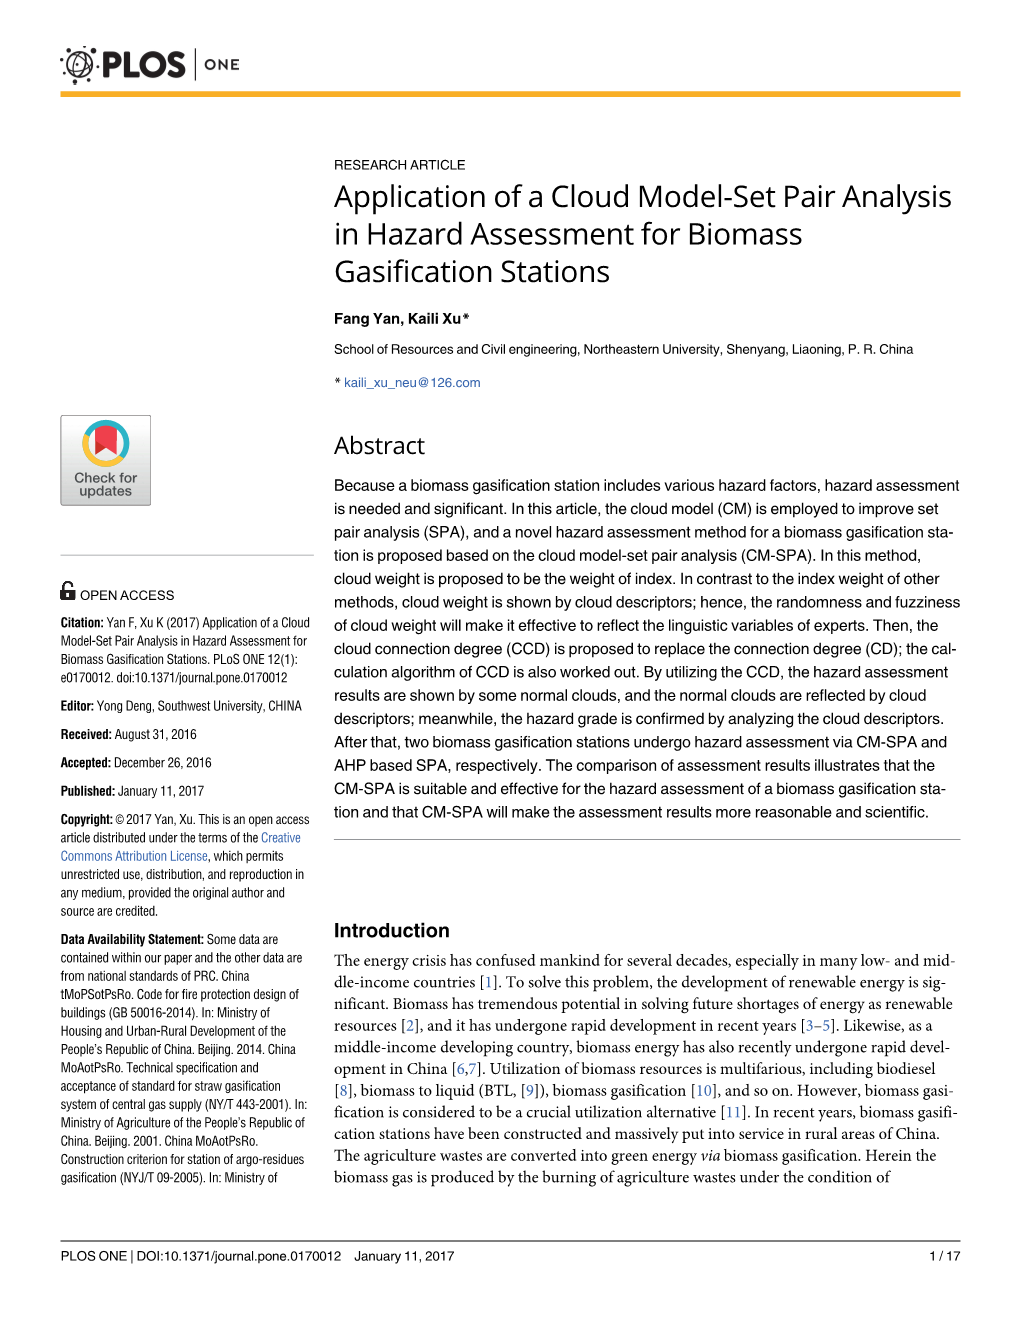 Application of a Cloud Model-Set Pair Analysis in Hazard Assessment for Biomass Gasification Stations